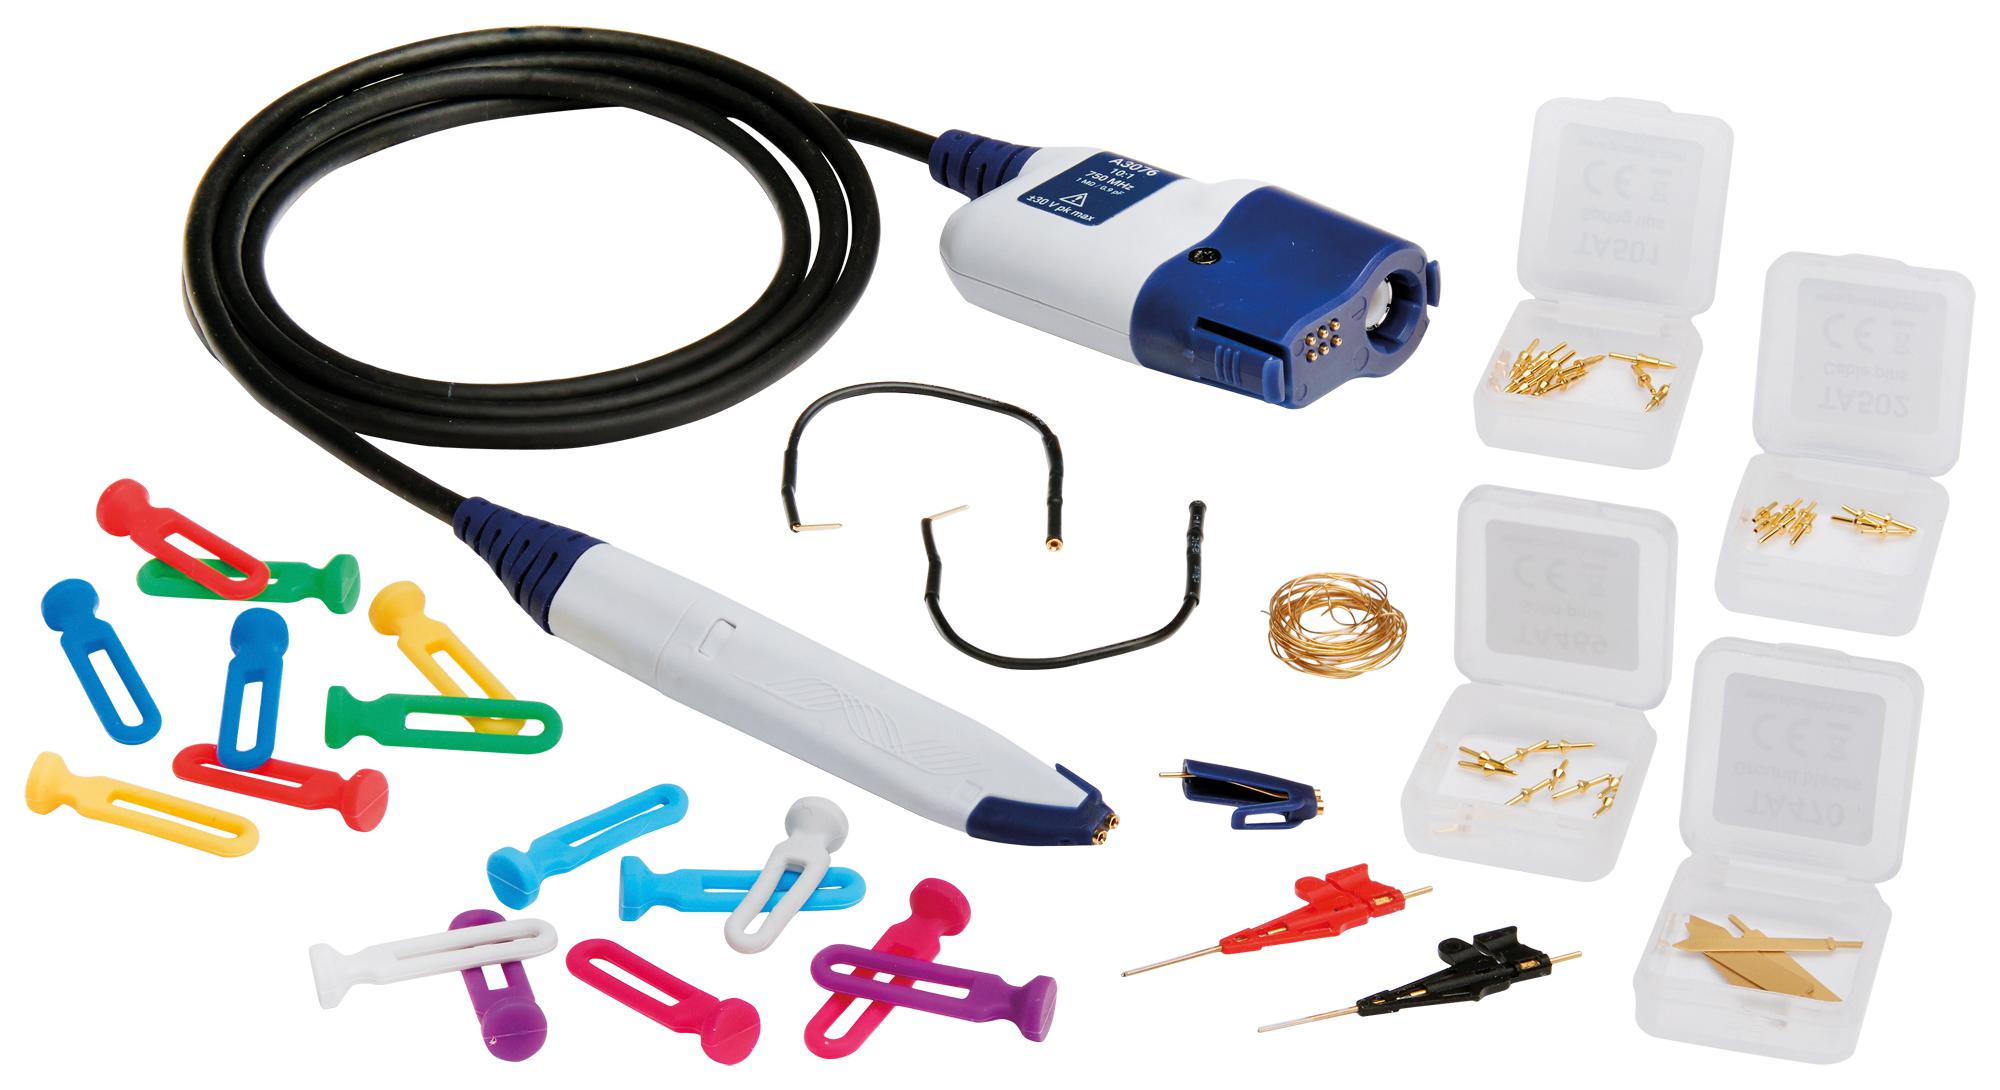 Pico Technology A3076 Single Ended Active Probe Kit, 750Mhz